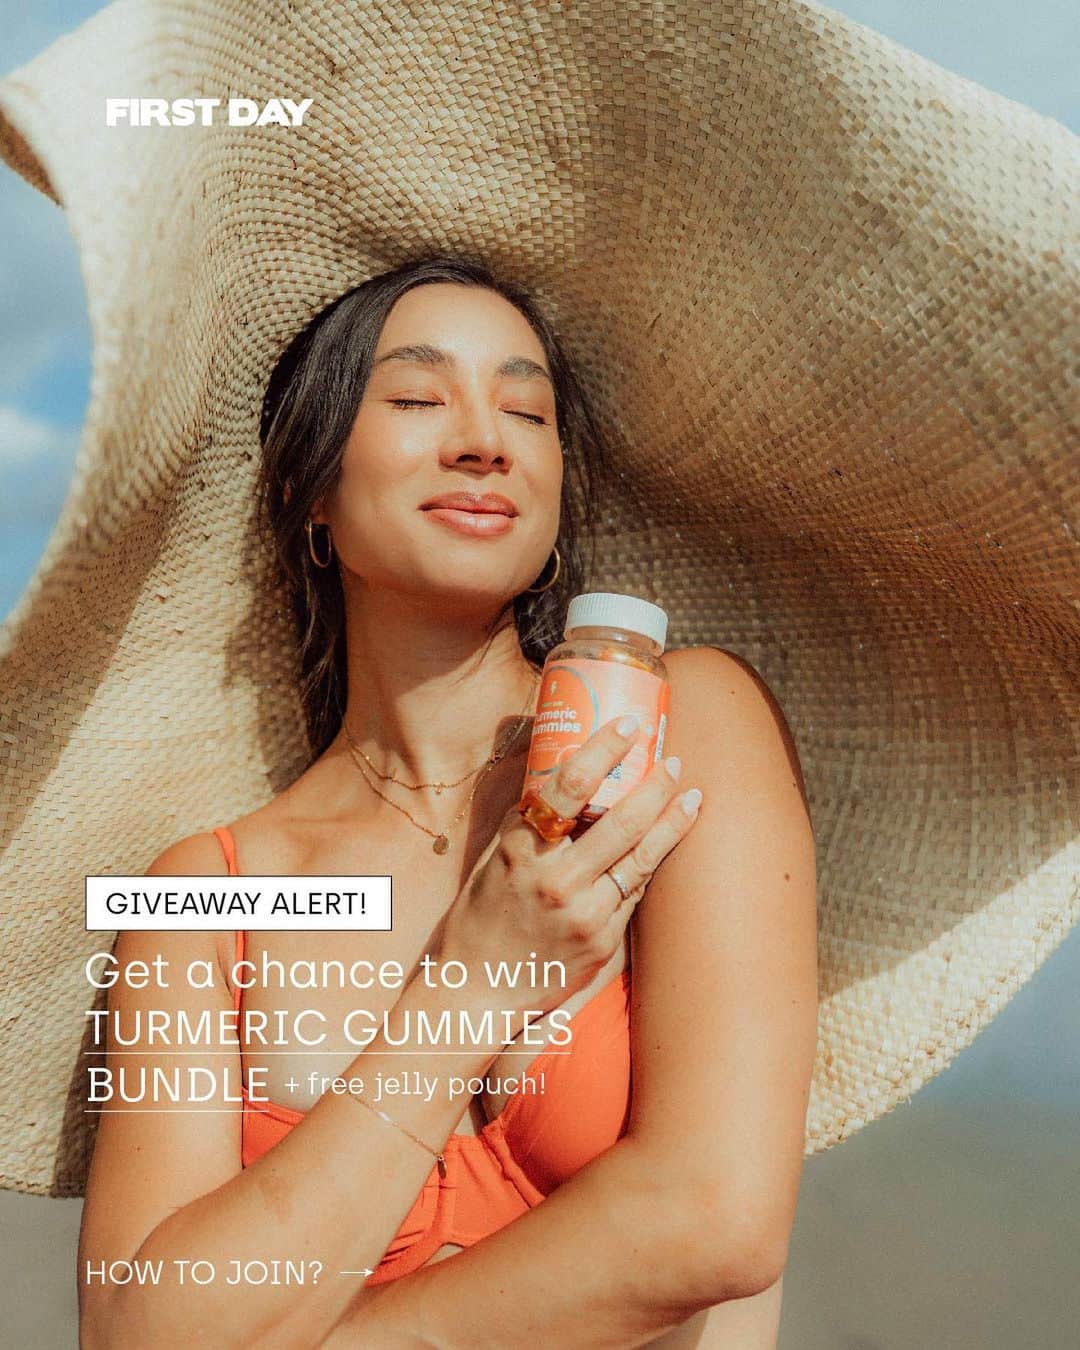 Jennifer Bachdimさんのインスタグラム写真 - (Jennifer BachdimInstagram)「GIVEAWAY TURMERIC GUMMY BUNDLES (x3 Bottles) with @firstdaygummies!☀️⚡️  I am SO grateful for the excitement for our skin-loving, UV-protecting gummies. The only vitamins that gives you protection from within, repairs your skin barrier, and lightens dark spots and pigmentation. My skin now feels glowing, and I am never afraid to go out and face the day. Now it's your turn to experience the #SunscreenFromWithin!  I am giving away 3 bundles for 3 special winners! The rules are simple:   1. Follow @firstdaygummies.  2. Save and share this post.  3. Tag 2 of your friends and comment on why you need this product!  4. Make sure your account is public. No fake accounts.   [BONUS] I'm also looking for content creators that are interested to join our team! DM @firstdaygummies if you're interested.  Submission period is from 24 May to 31 May 2023, and the winner will be announced on 1 June 2023.  Good luck, First Day Squad!💛」5月24日 19時26分 - jenniferbachdim